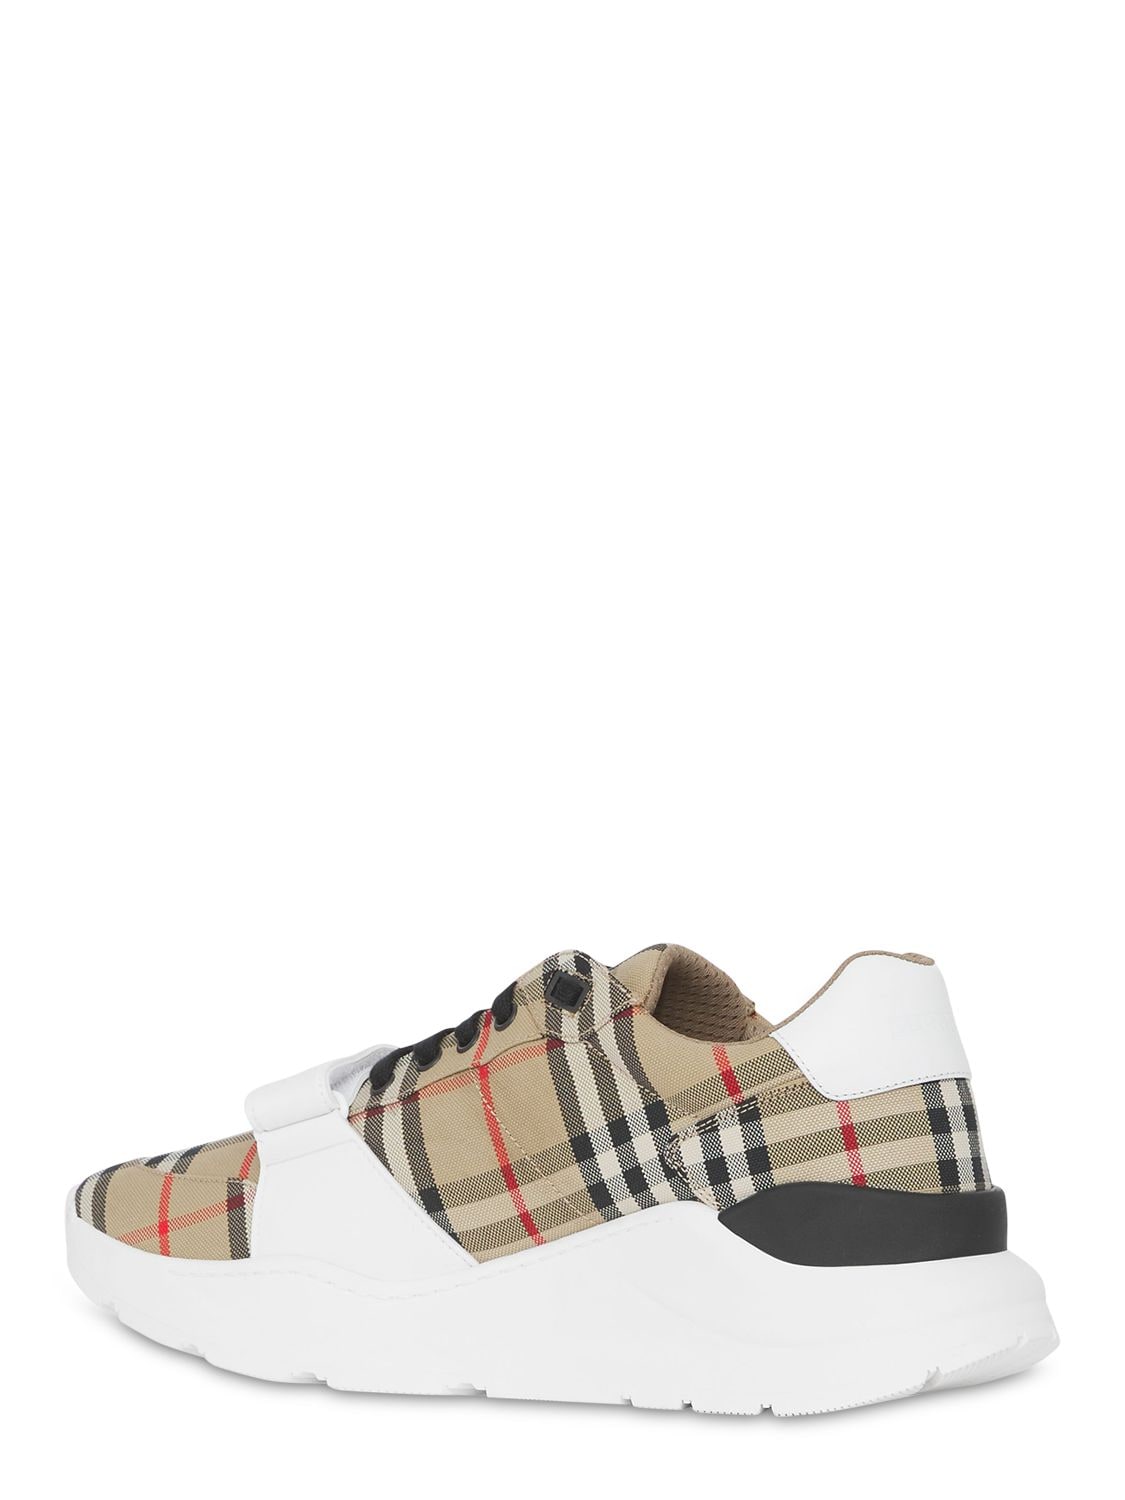 Shop Burberry 30mm New Regis Check Canvas Sneakers In White,multi